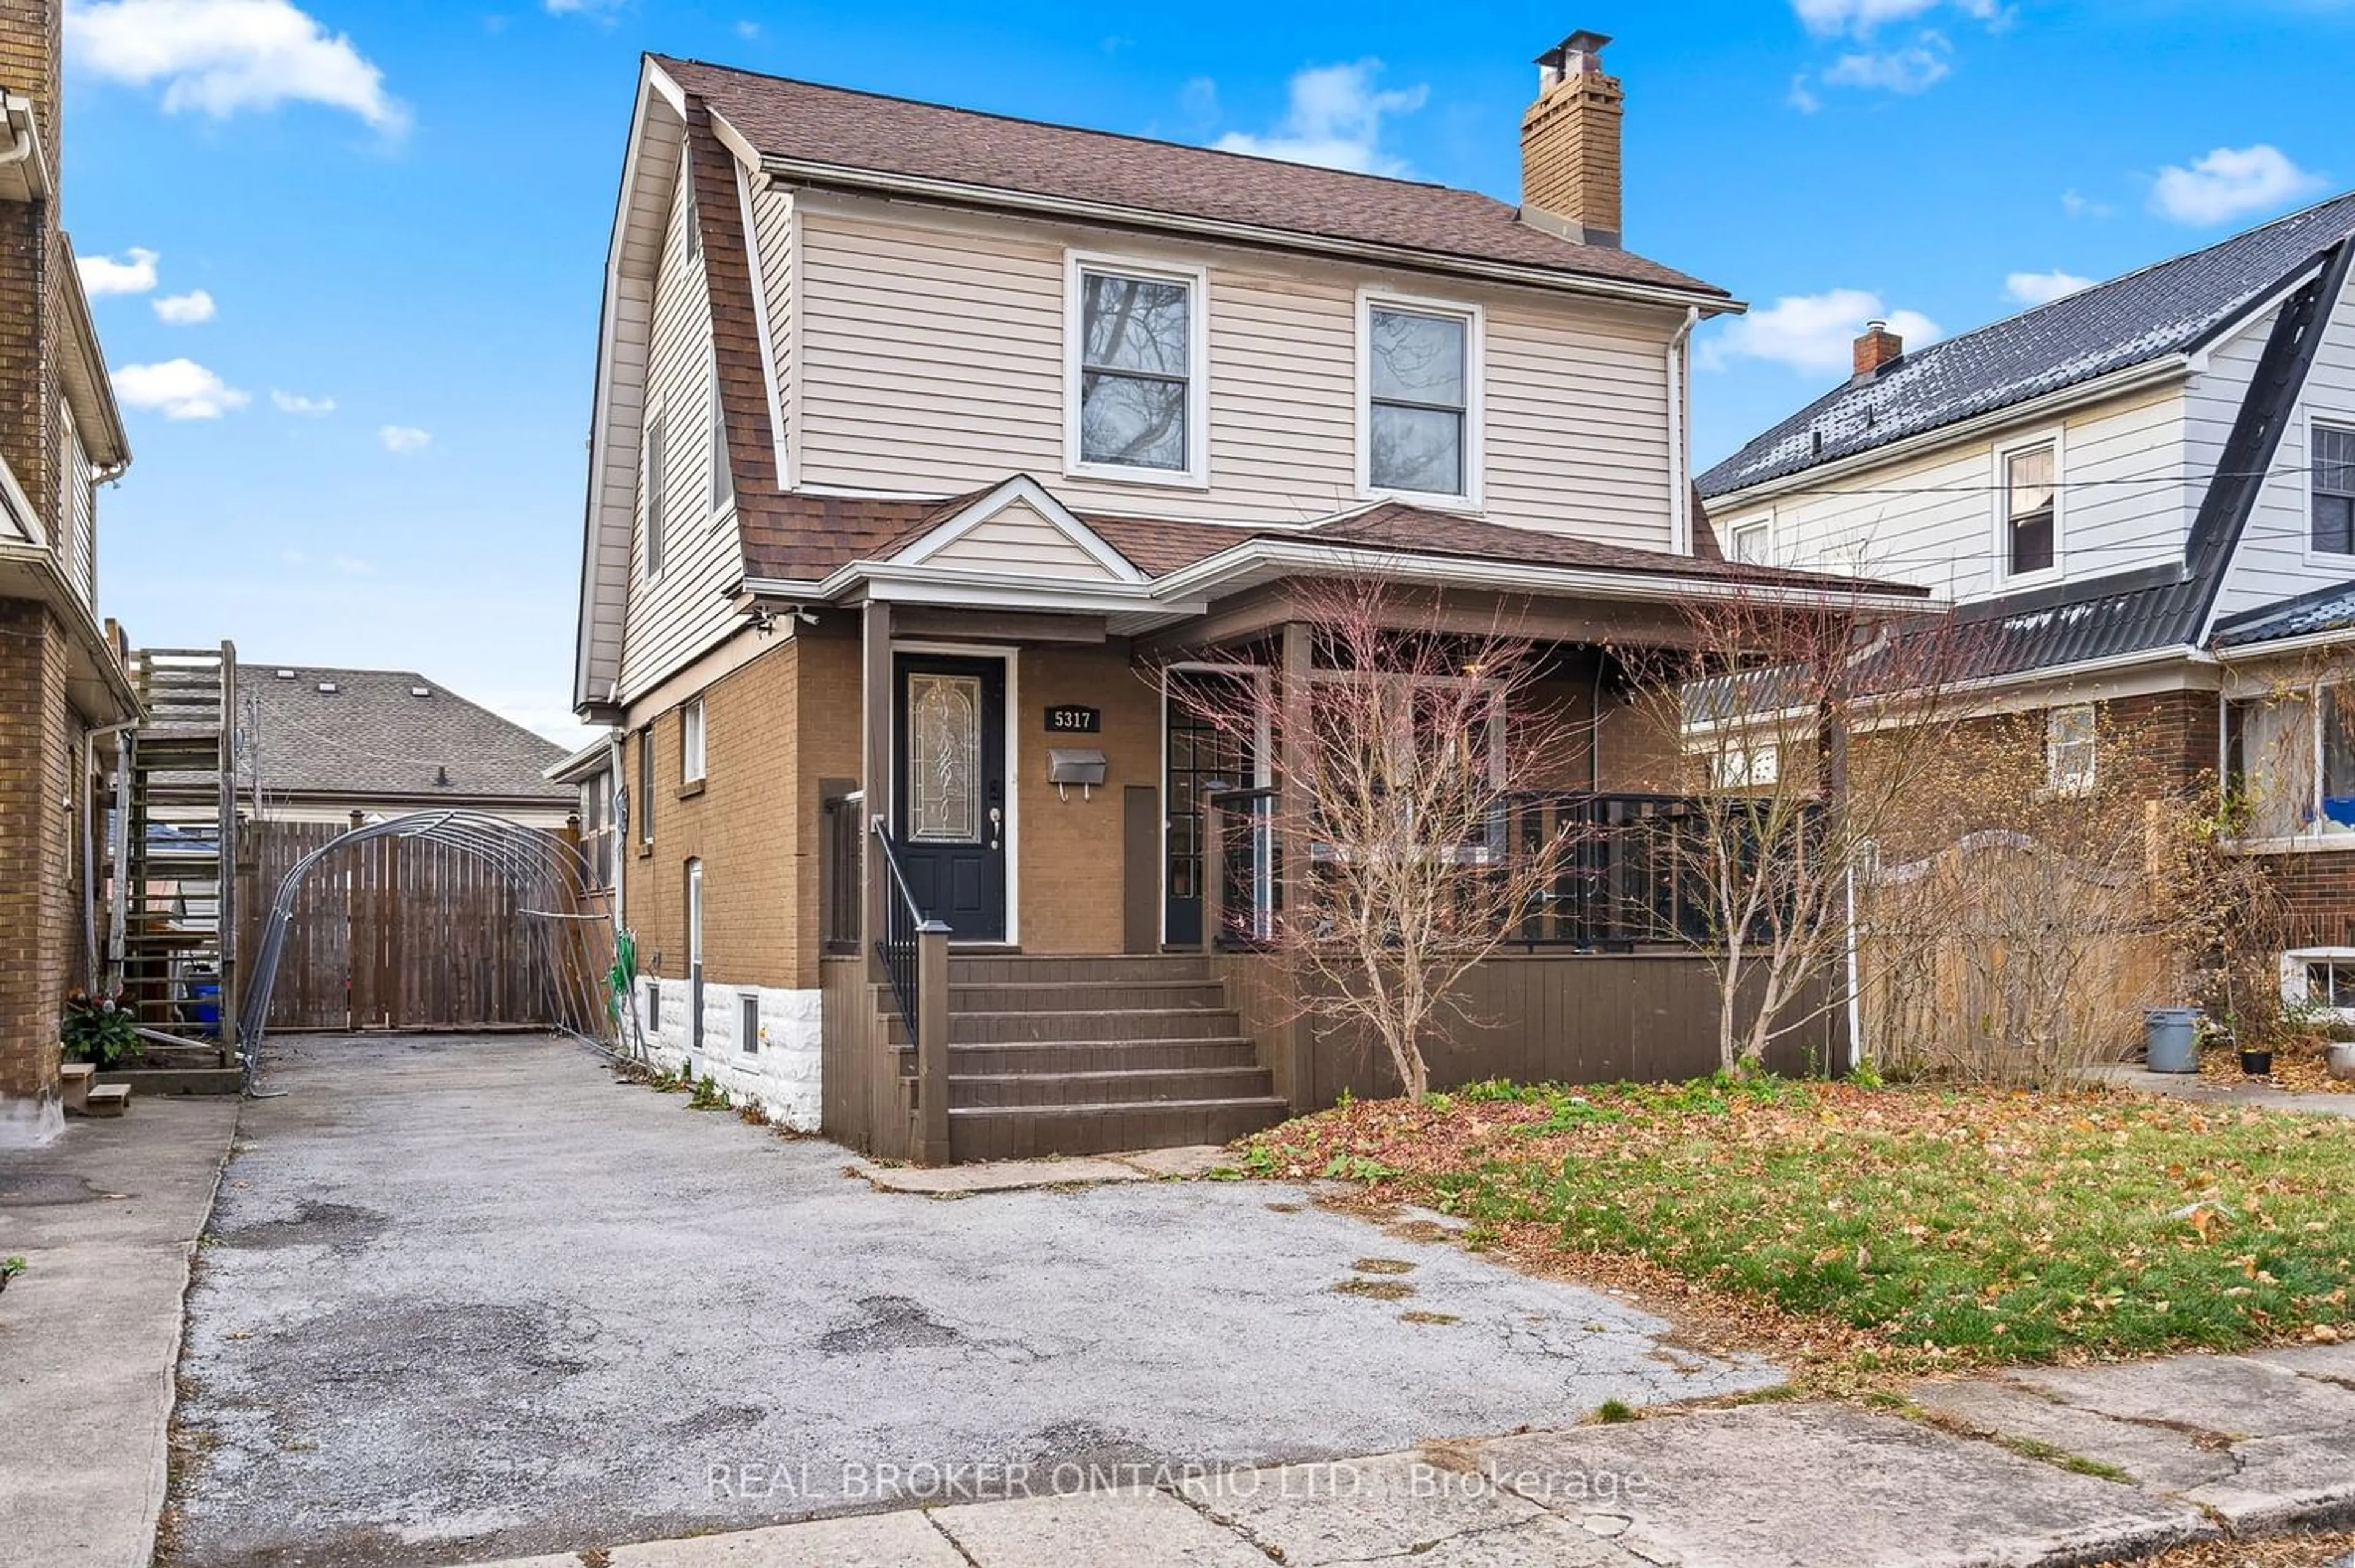 Home with unknown exterior material for 5317 Third Ave, Niagara Falls Ontario L2E 4M6